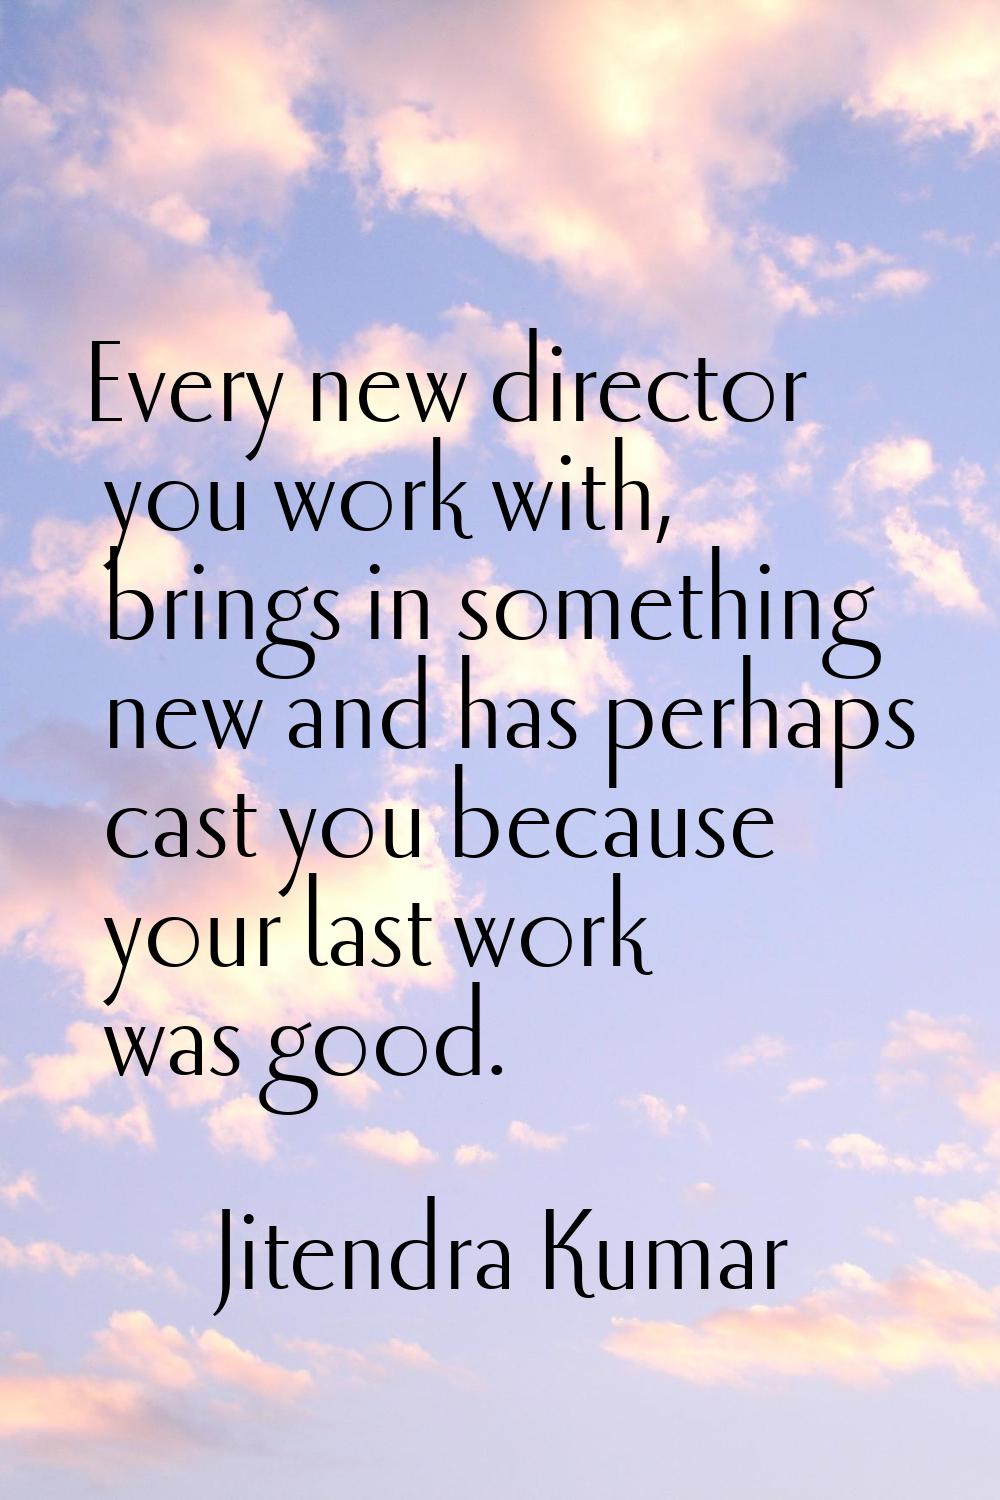 Every new director you work with, brings in something new and has perhaps cast you because your las